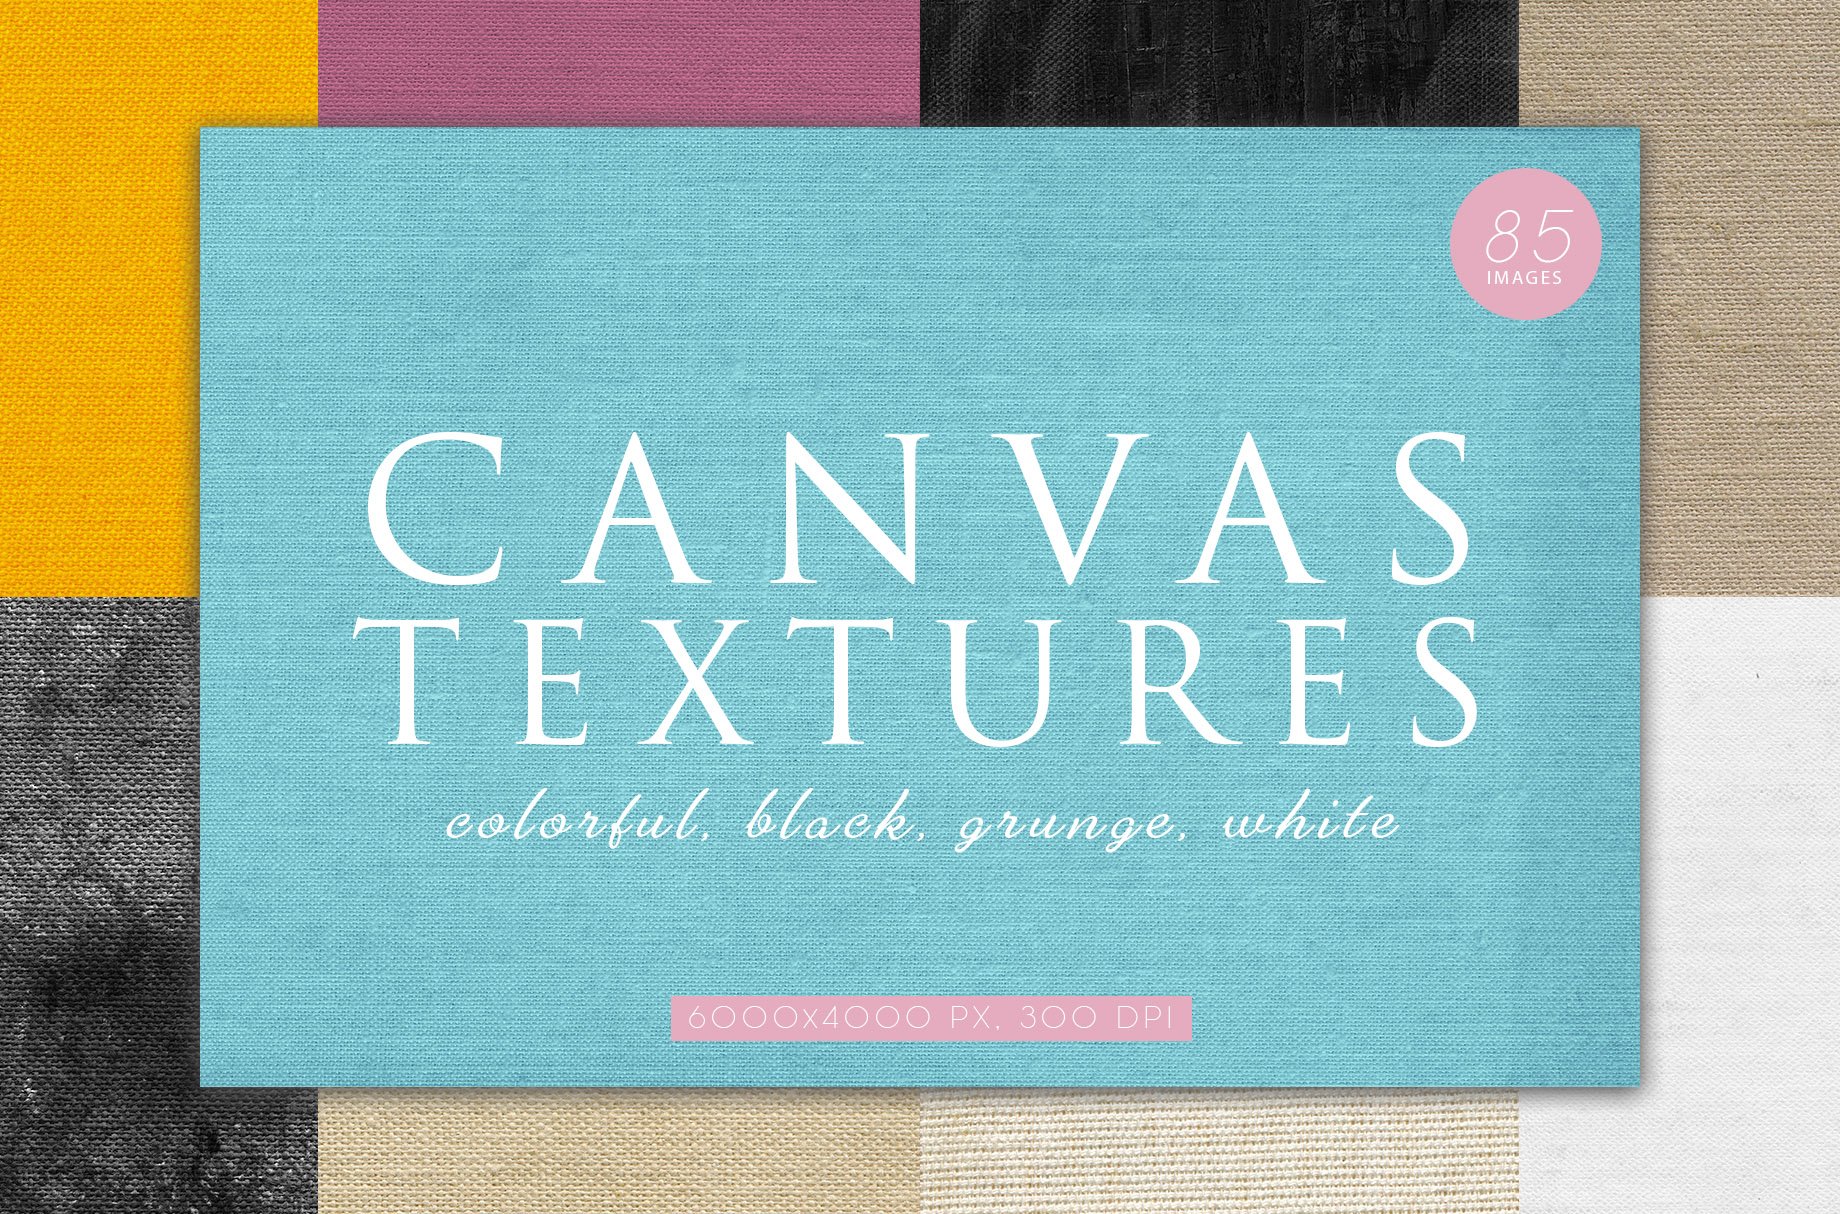 85 Various Canvas Textures cover image.